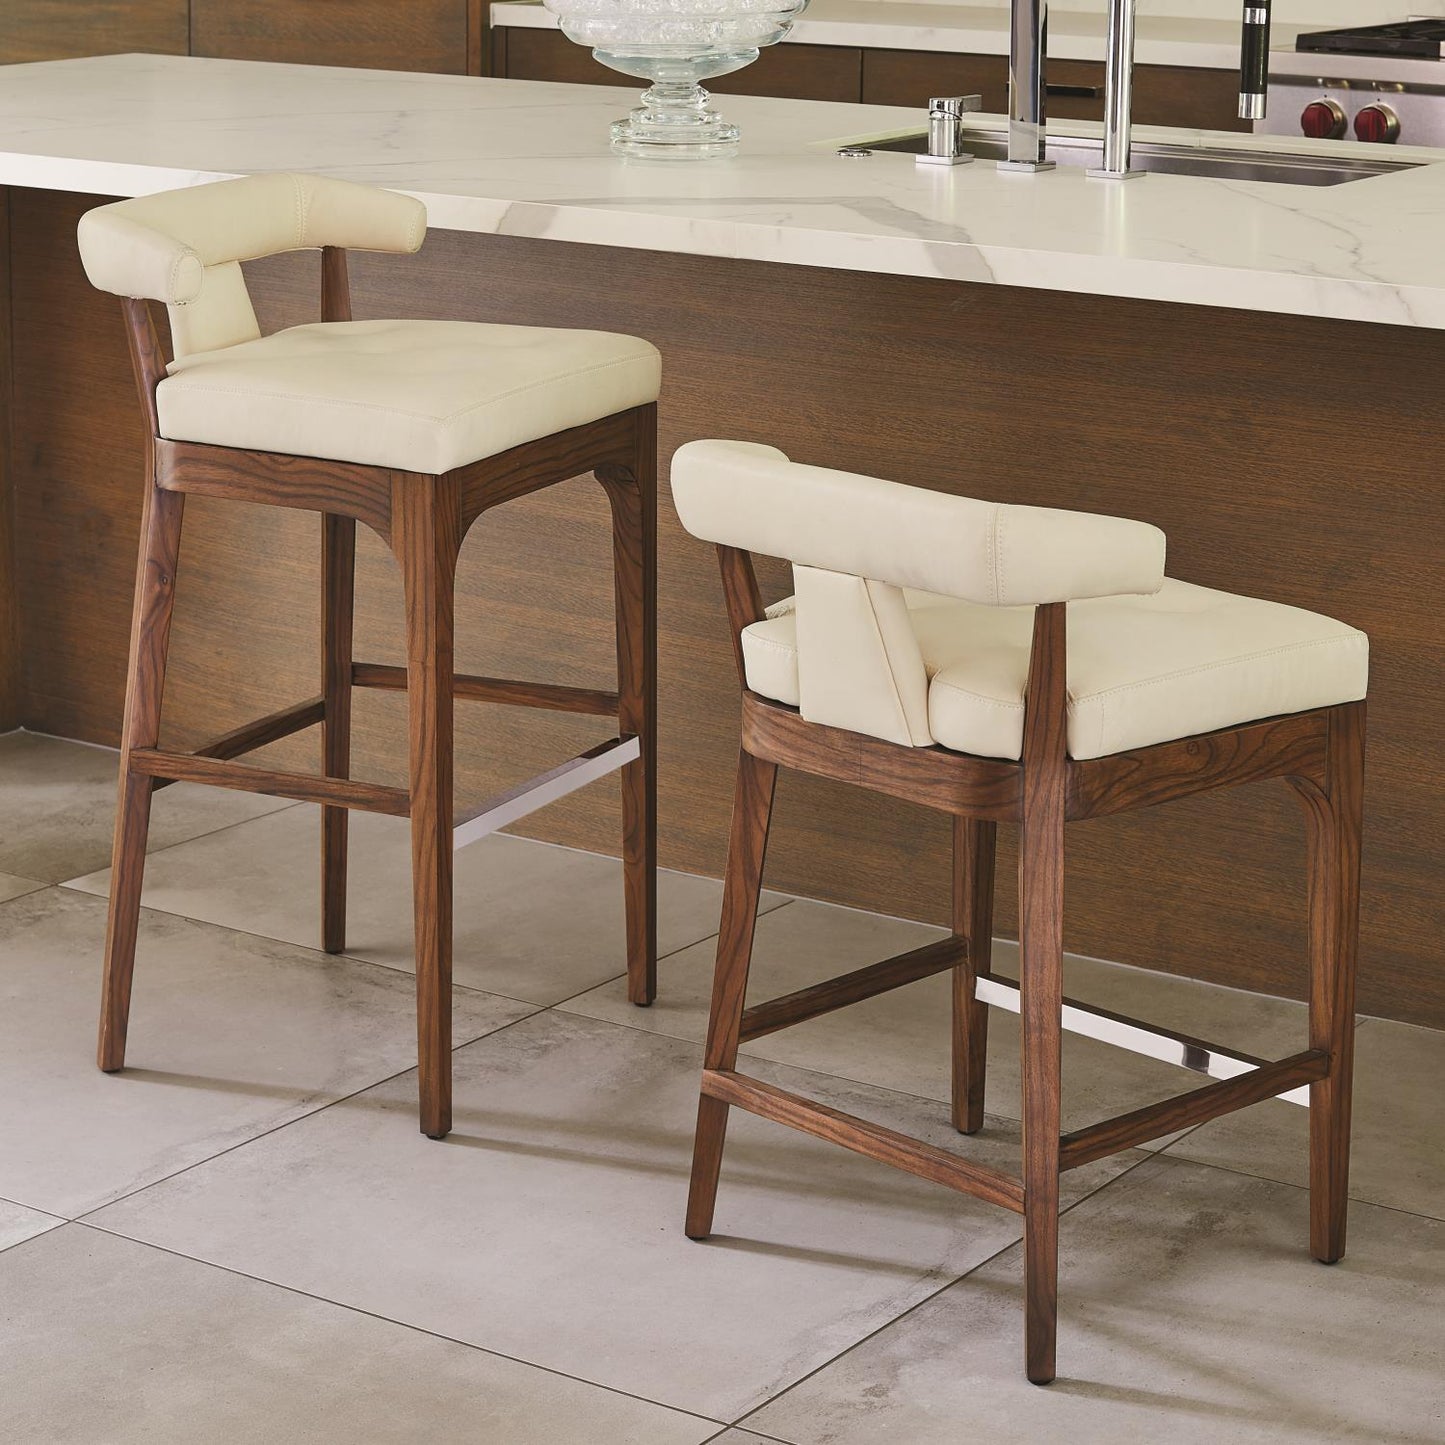 Moderno Counter Stool - Ivory Marble Leather - Grats Decor Interior Design & Build Inc.